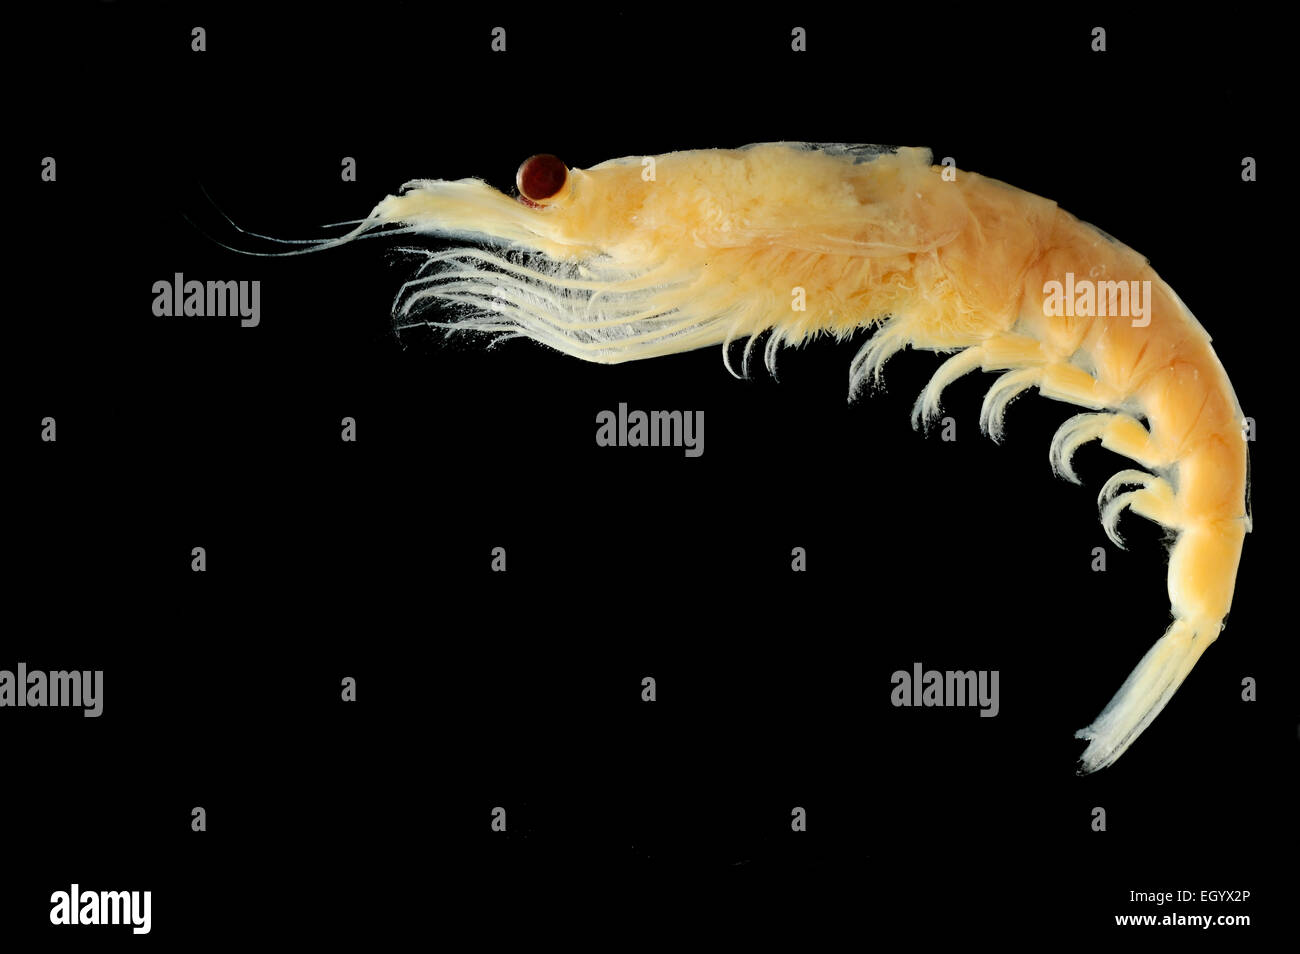 Antarctic krill (Euphausia superba) Picture was taken in cooperation with the Zoological Museum University of Hamburg | Leuchtga Stock Photo